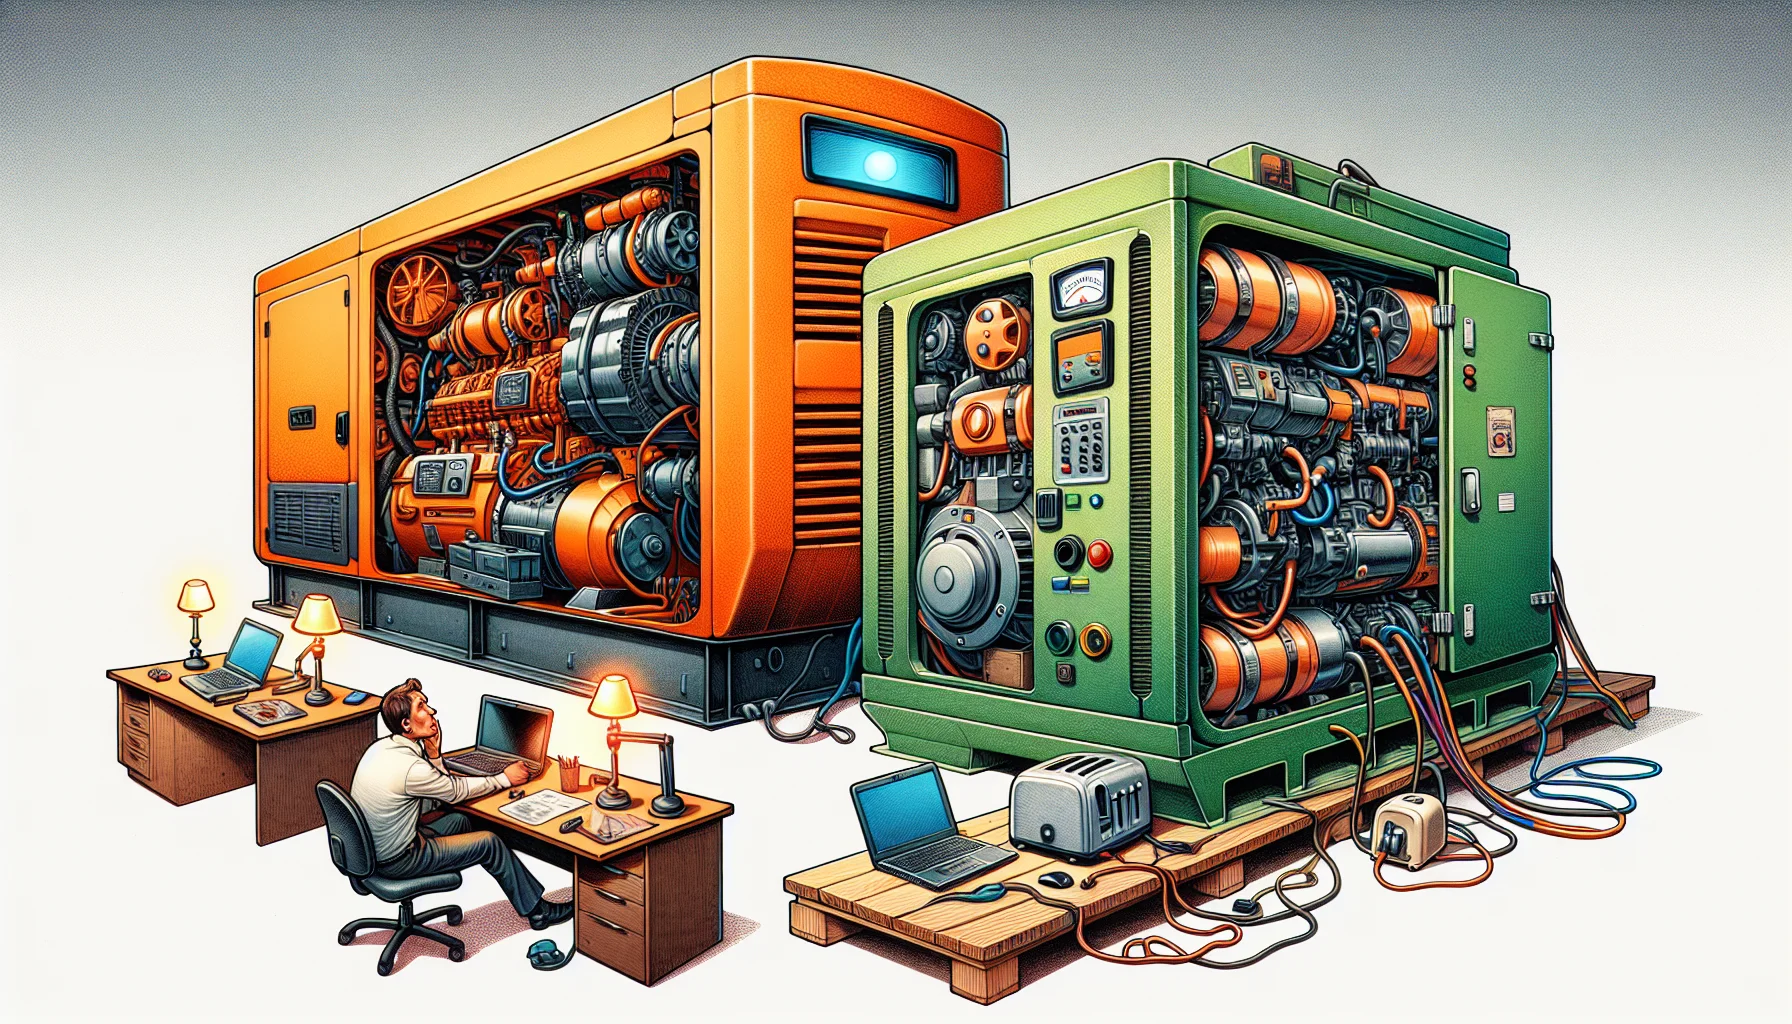 Generate a humorous scene showcasing the comparison of two large industrial generators. On the left, depict a robustly-built generator painted a vibrant shade of orange with sleek, metal curves and a large control panel. To its right, illustrate another generator, this one a lighter shade of green with a more vintage, worn-out aesthetic. Both generators are connected to a variety of household and office items like a lamp, computer, and toaster. Also, include a few individuals including a Caucasian woman and a South Asian man, showing surprised expressions as they watch the performance of the two generators.